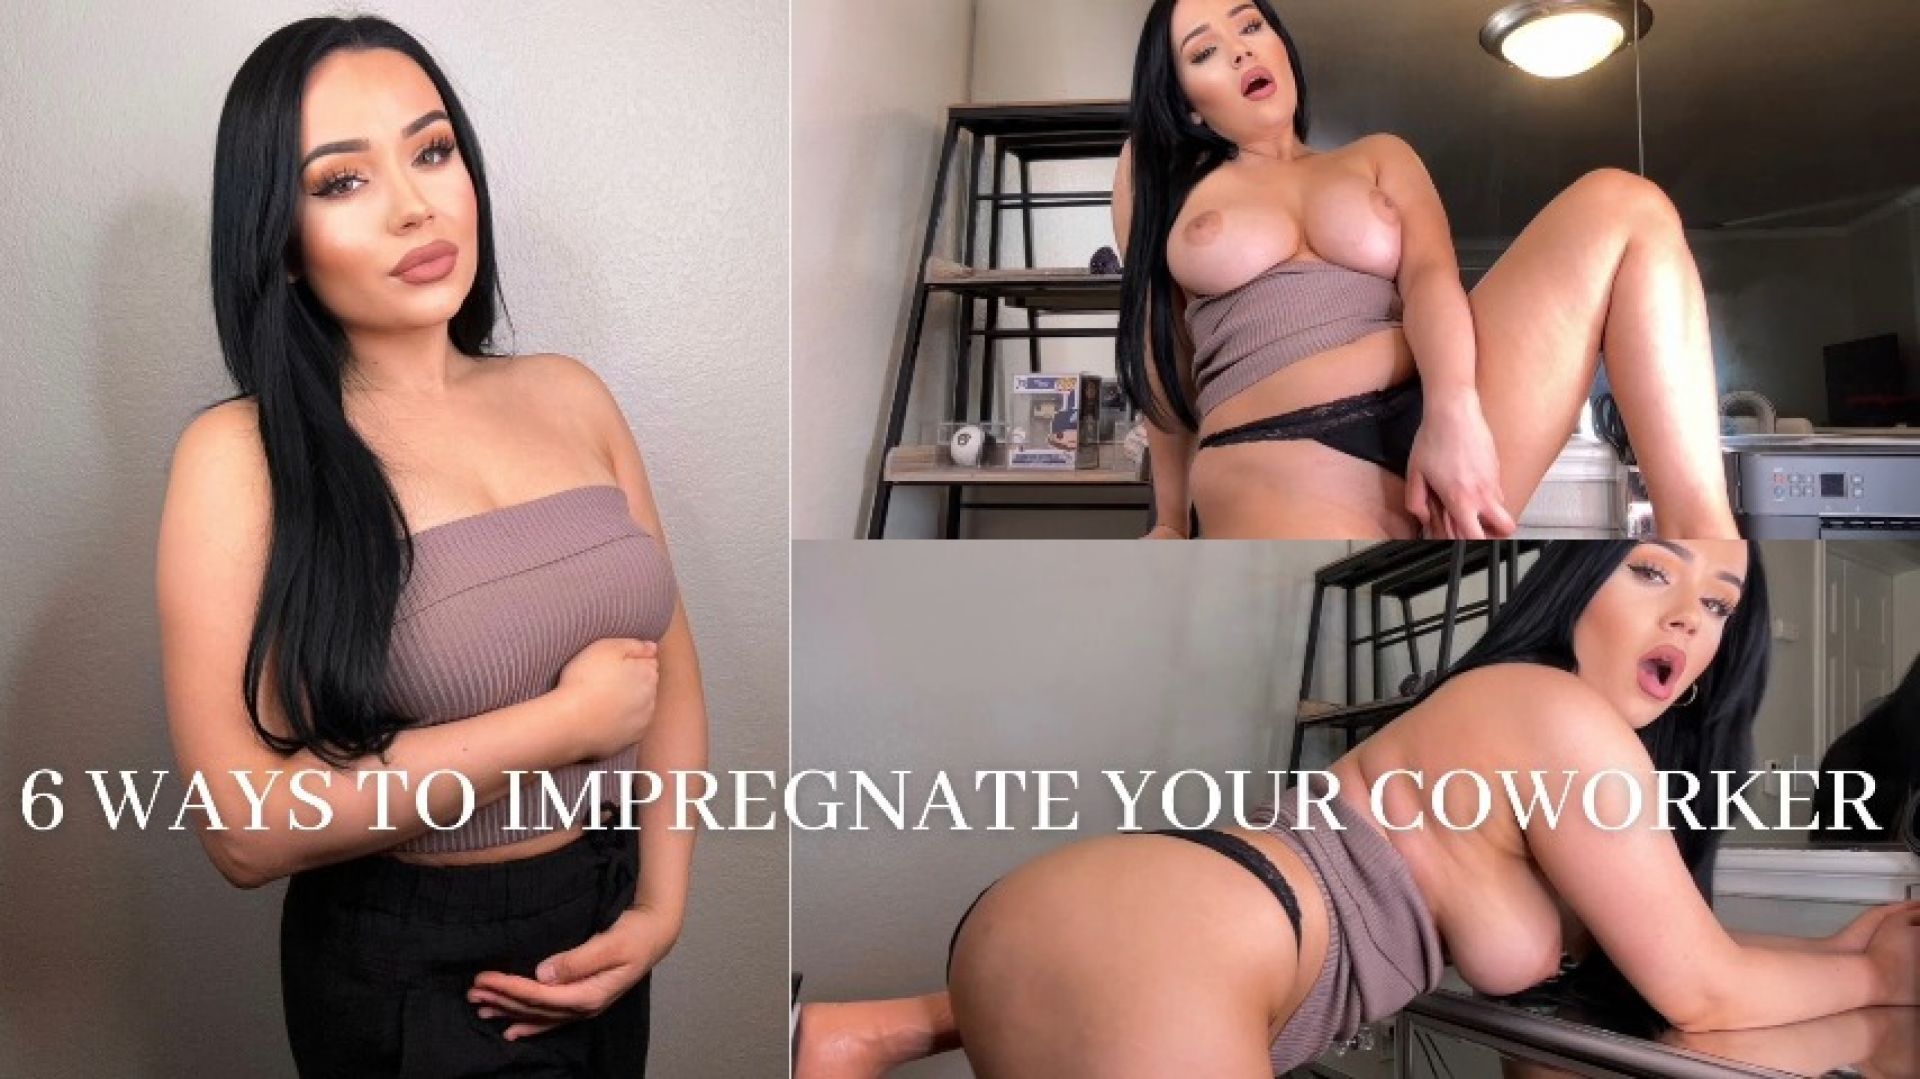 6 WAYS TO IMPREGNATE YOUR COWORKER